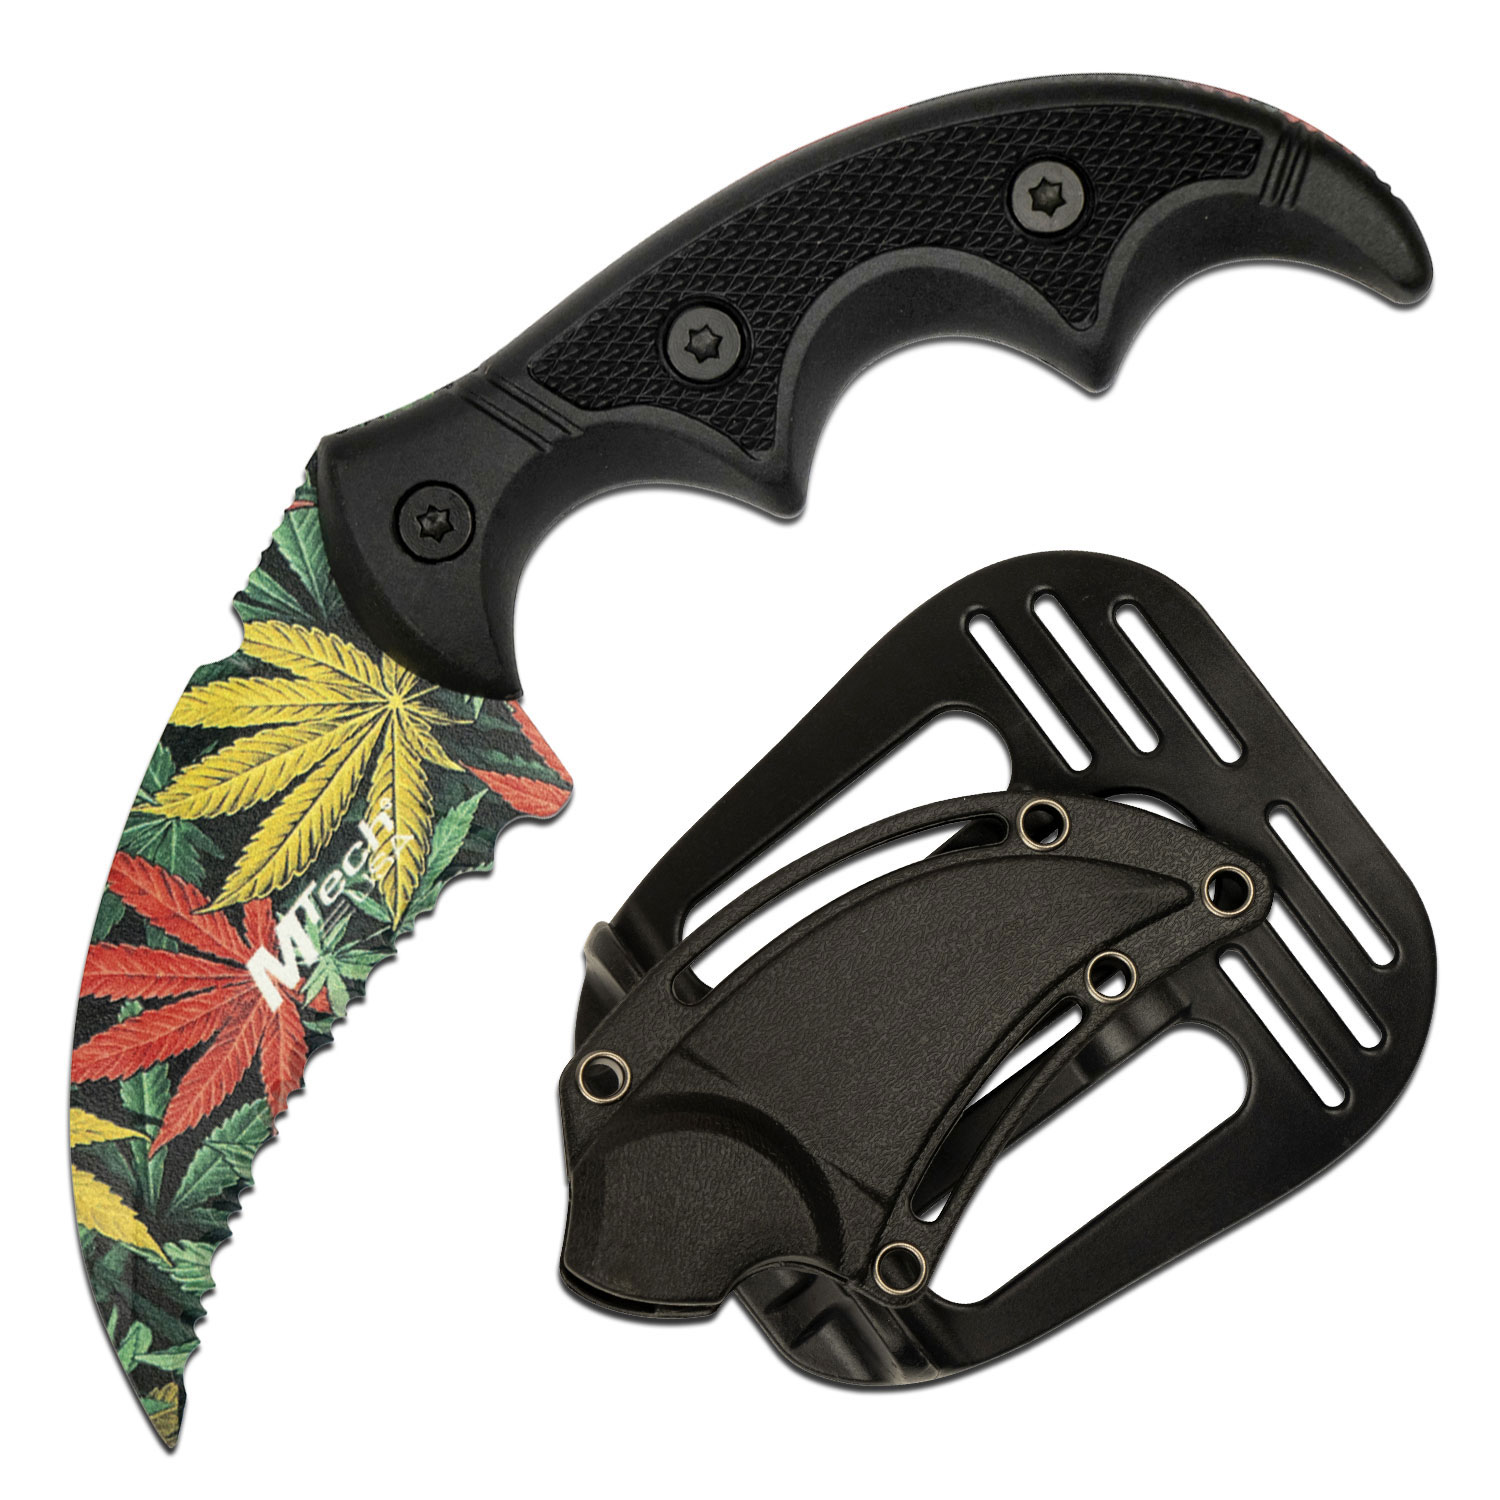 Karambit Tactical Knife Mtech Cannabis Weed 2in Serrated Blade Combat Boot Sheath